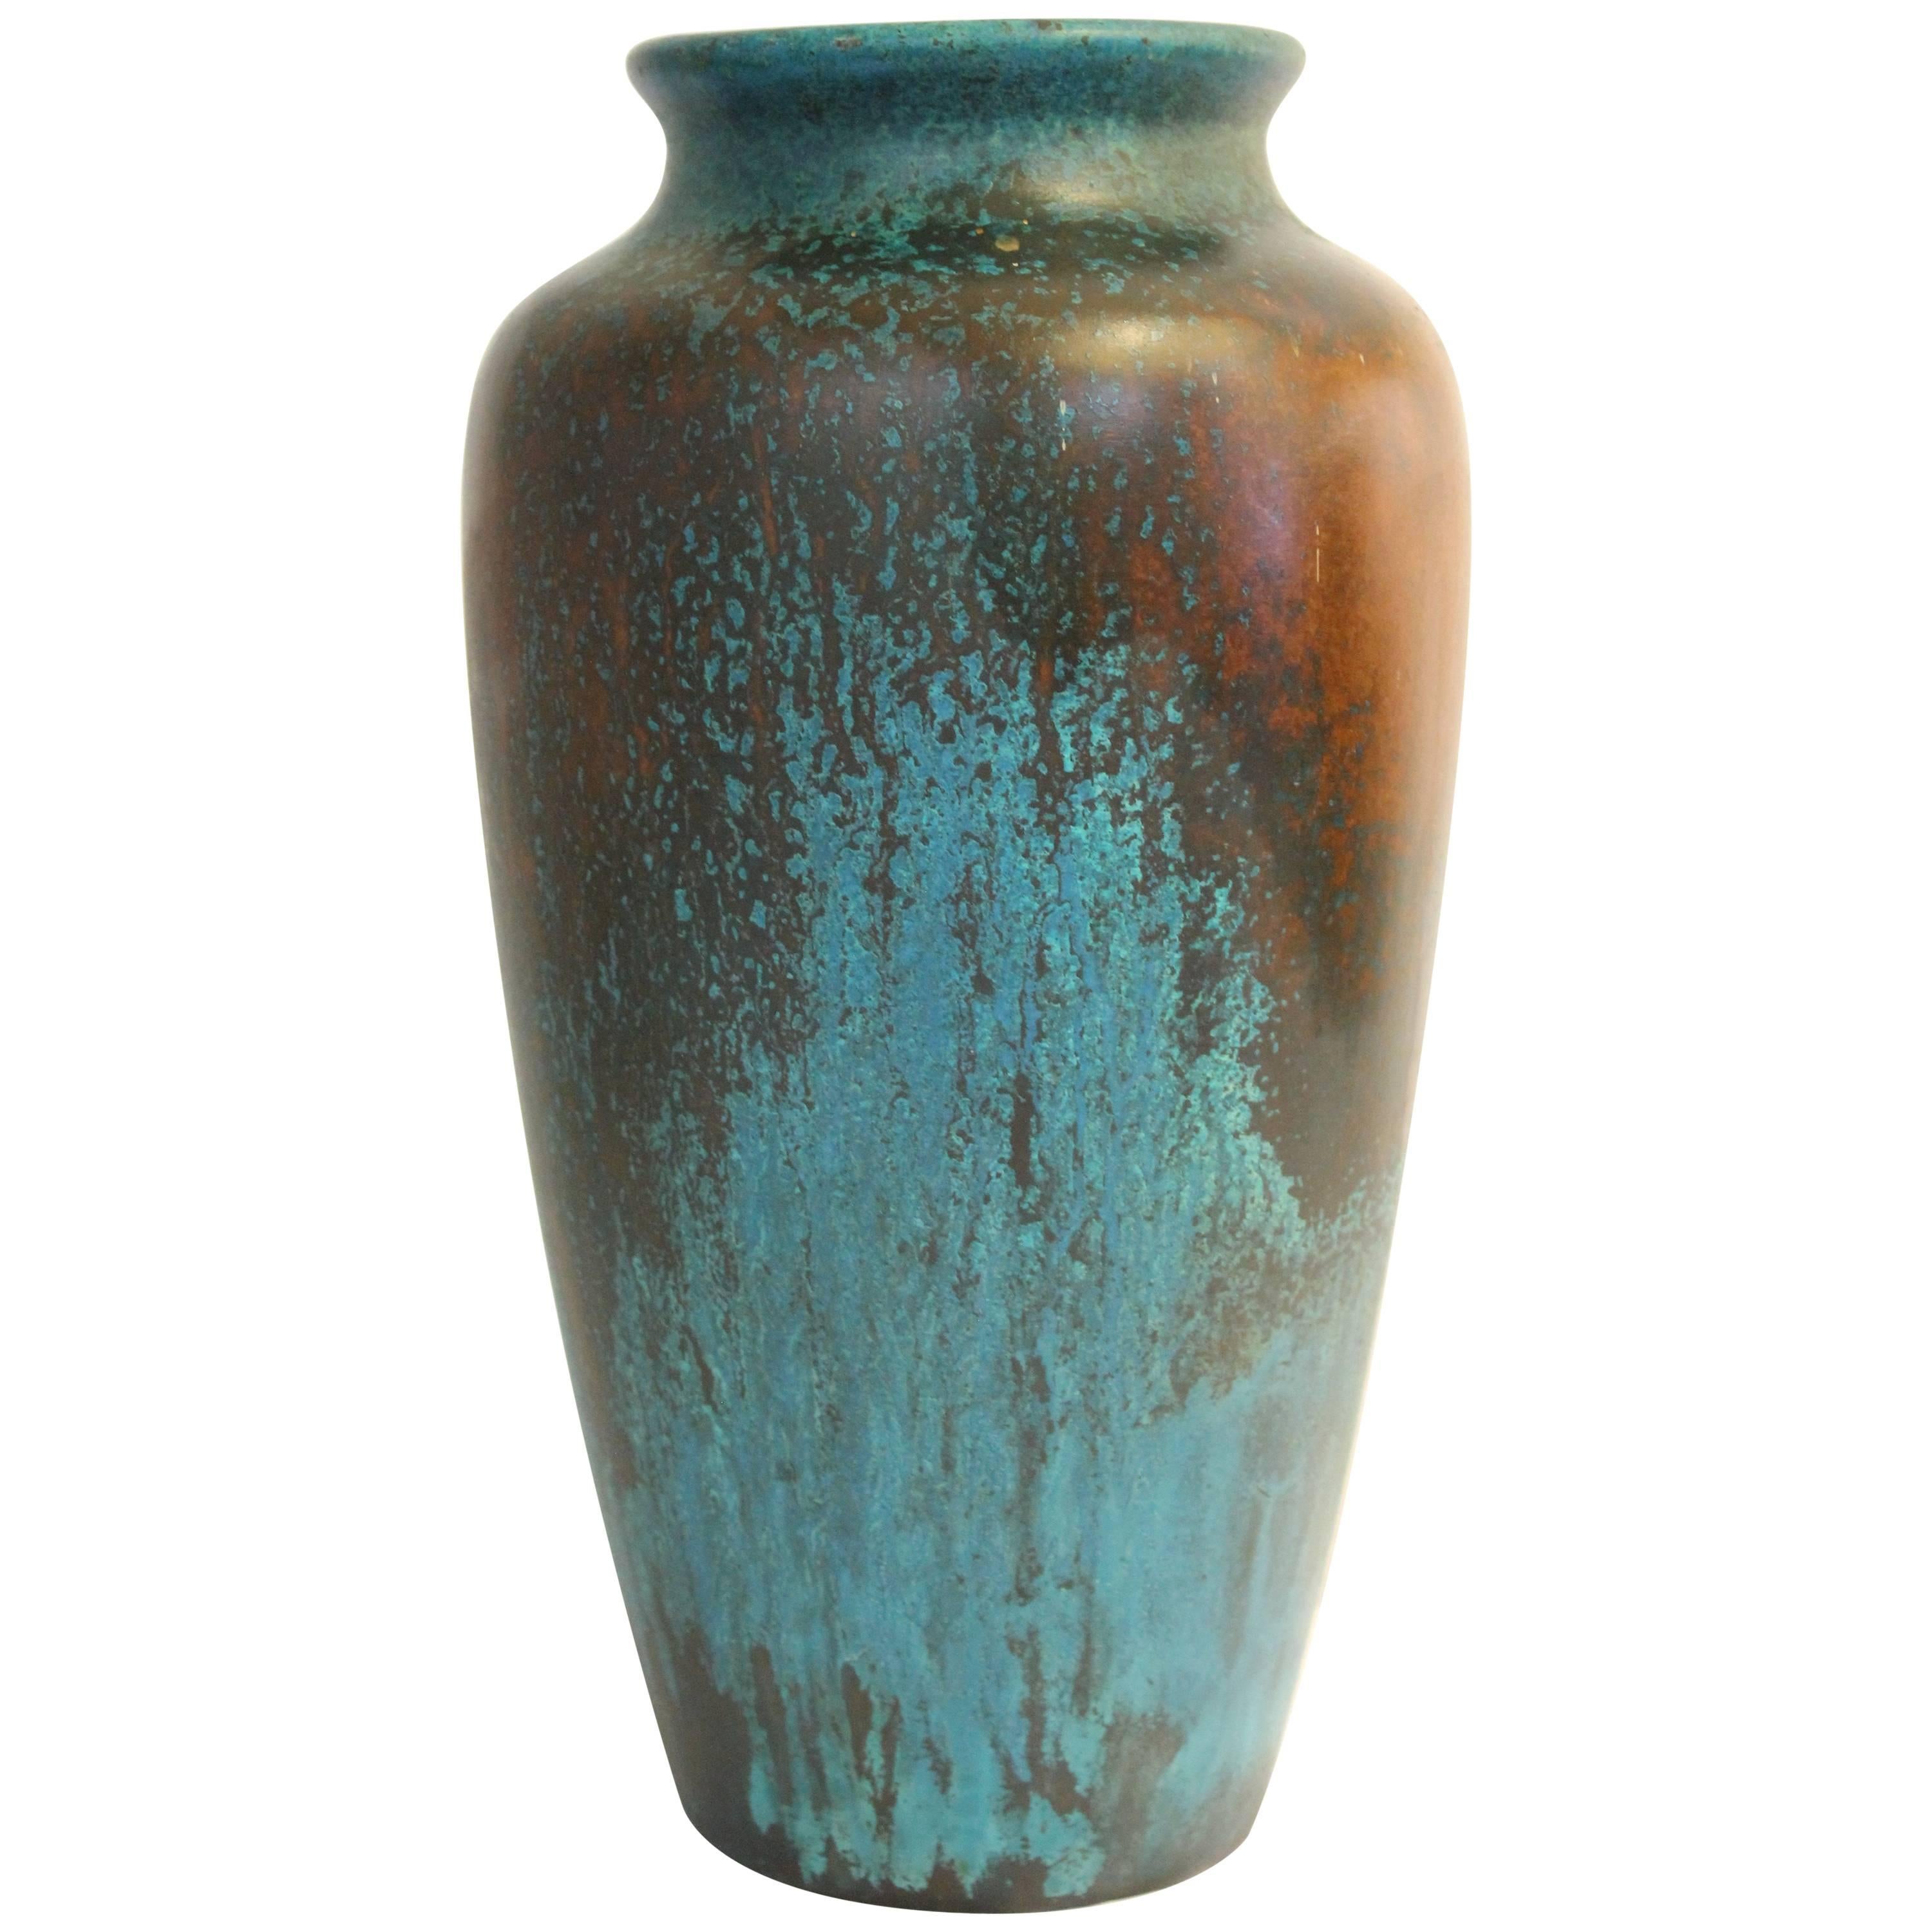 Clewell Copper-Clad Vase